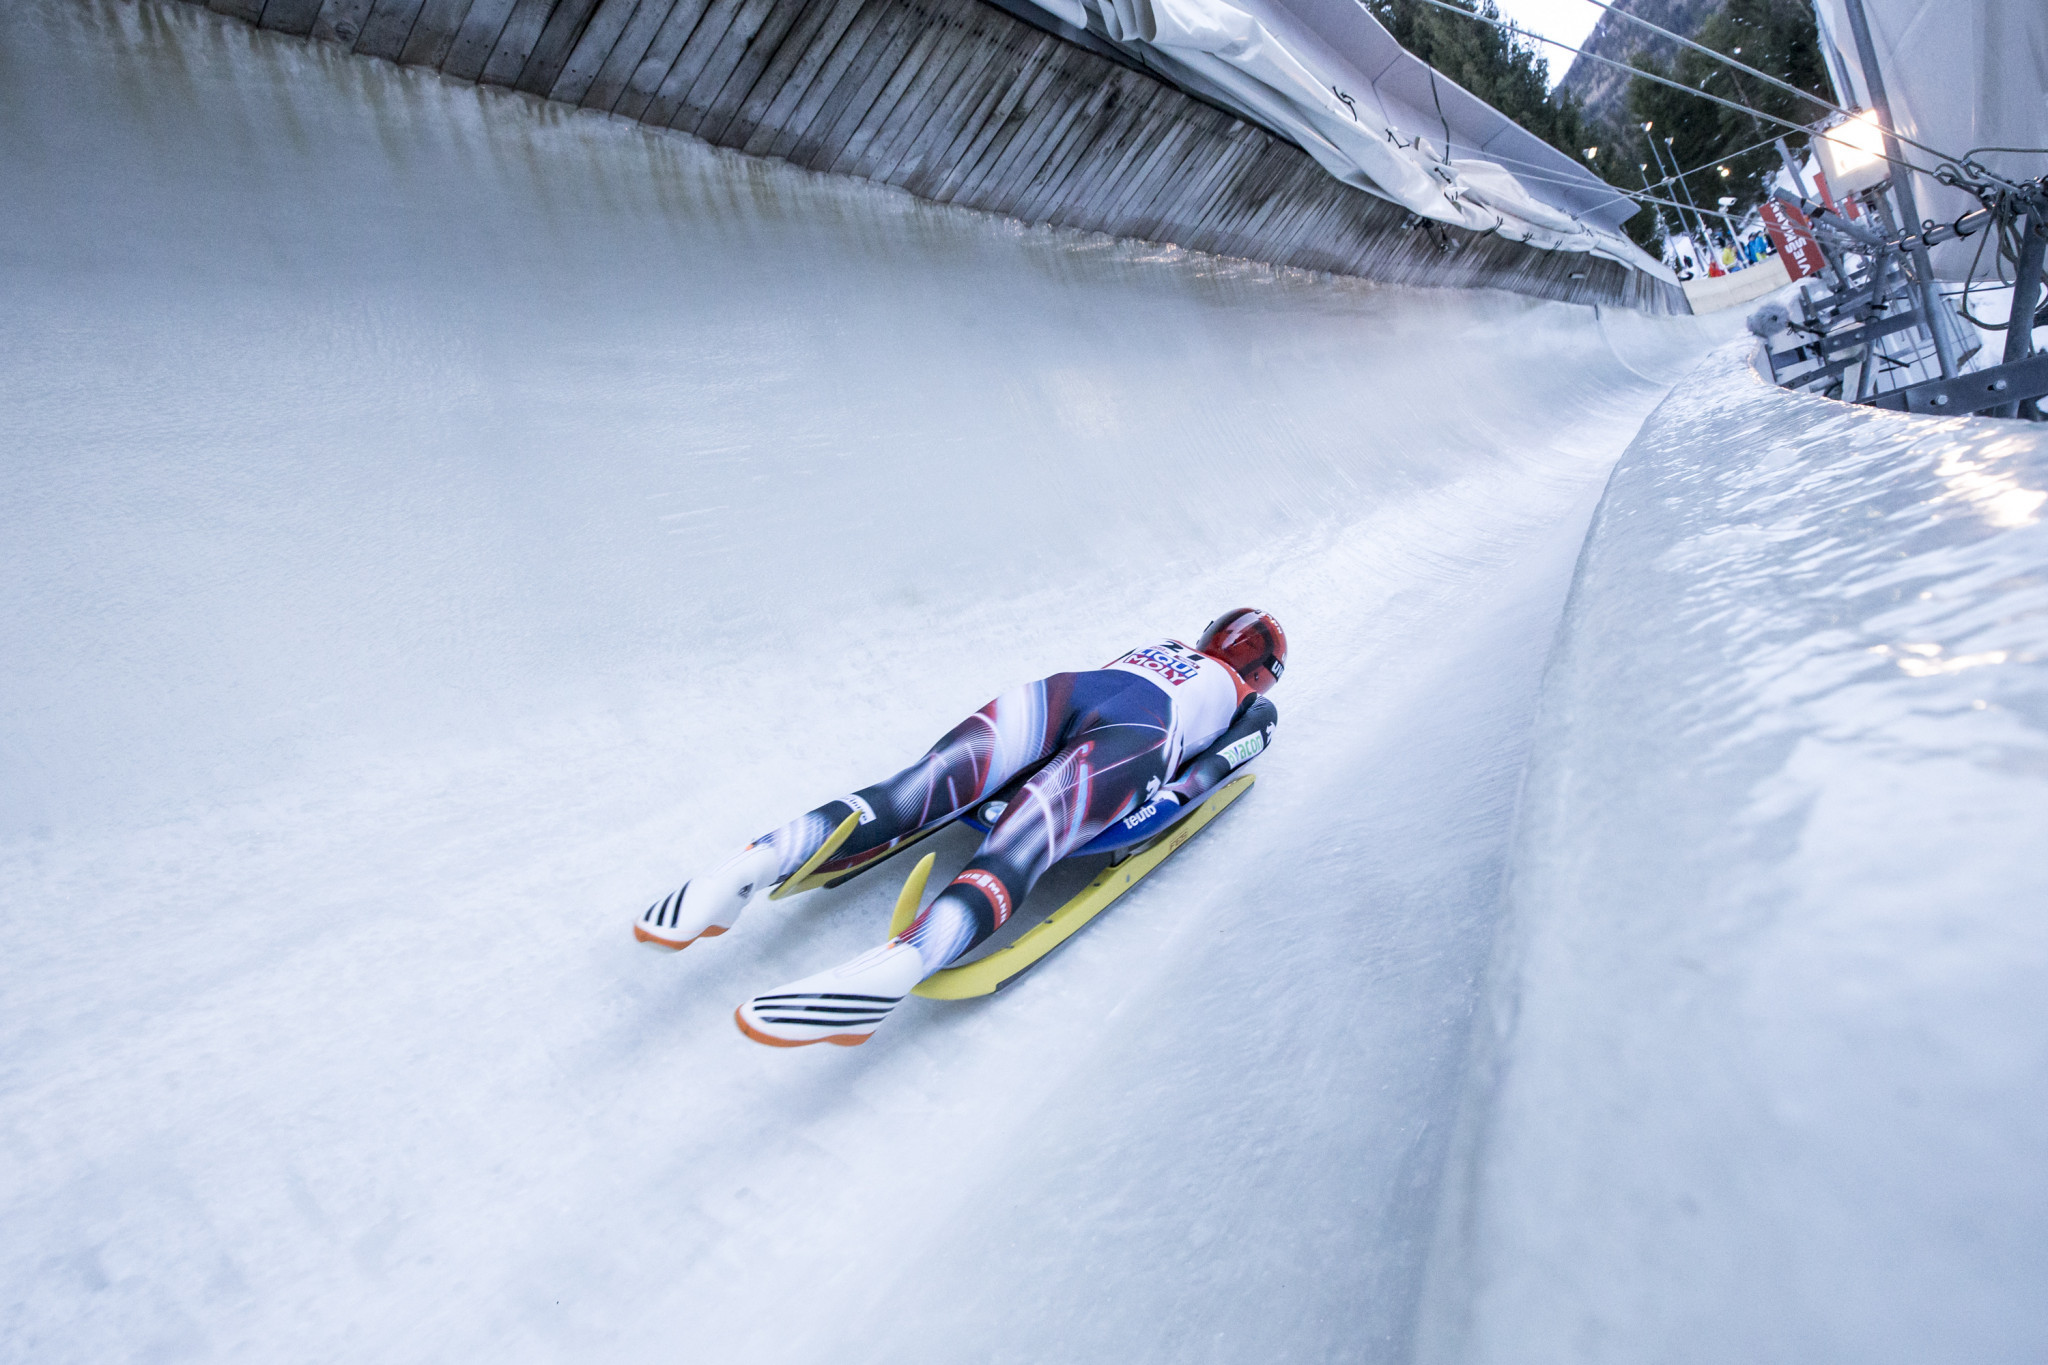 Germany's Julia Taubitz won her first Luge World Cup race of her career in Calgary ©Getty Images